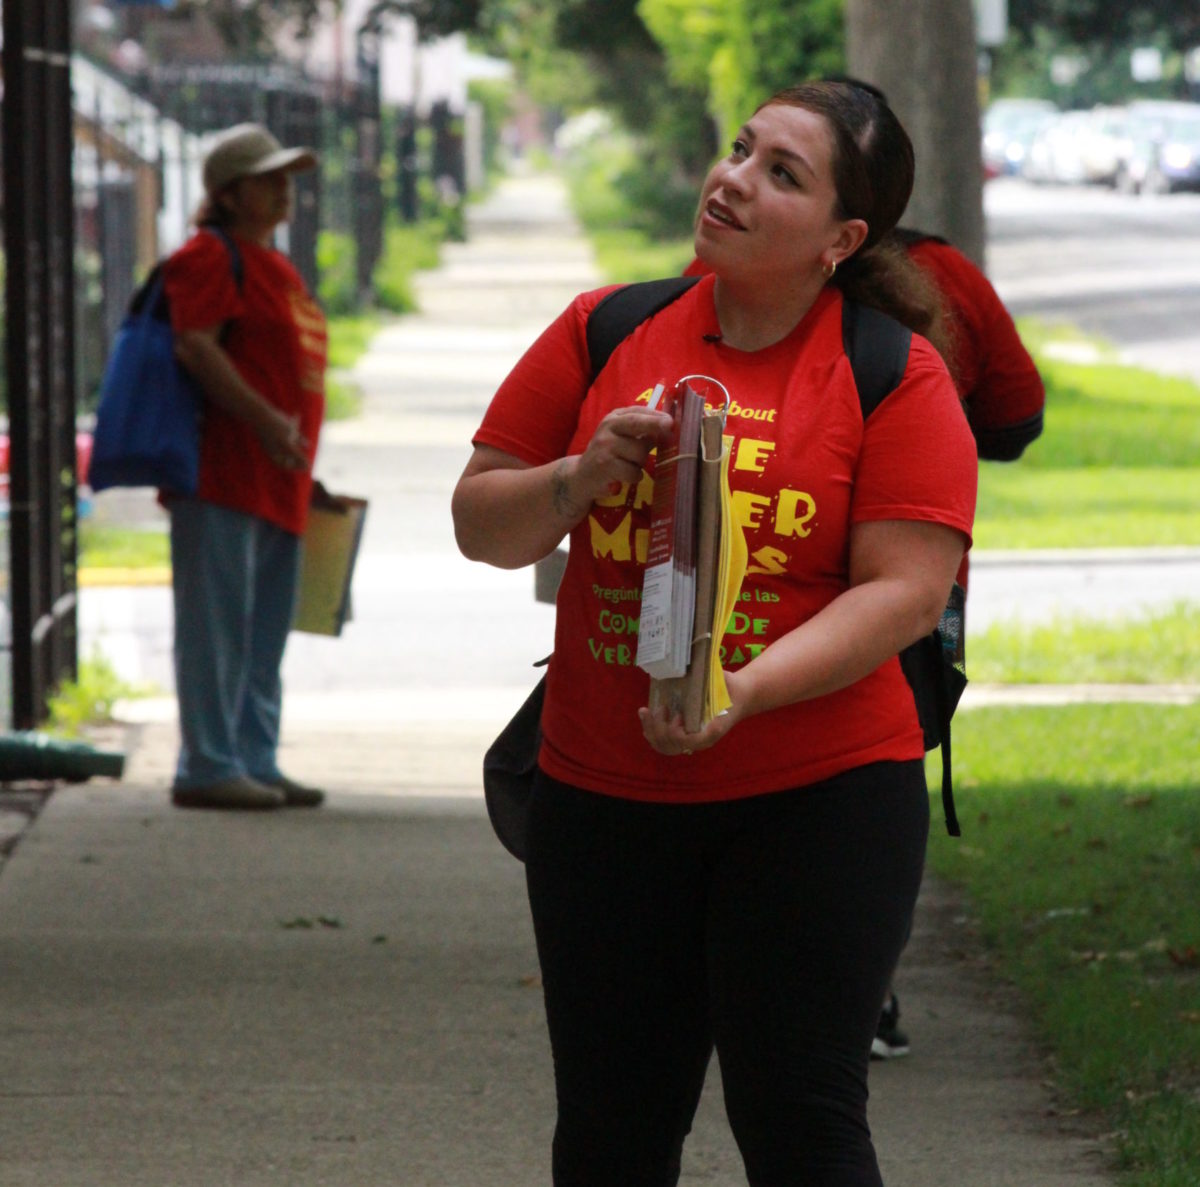 A woman wearing a bright red shirt conducts outreach for free summer meals